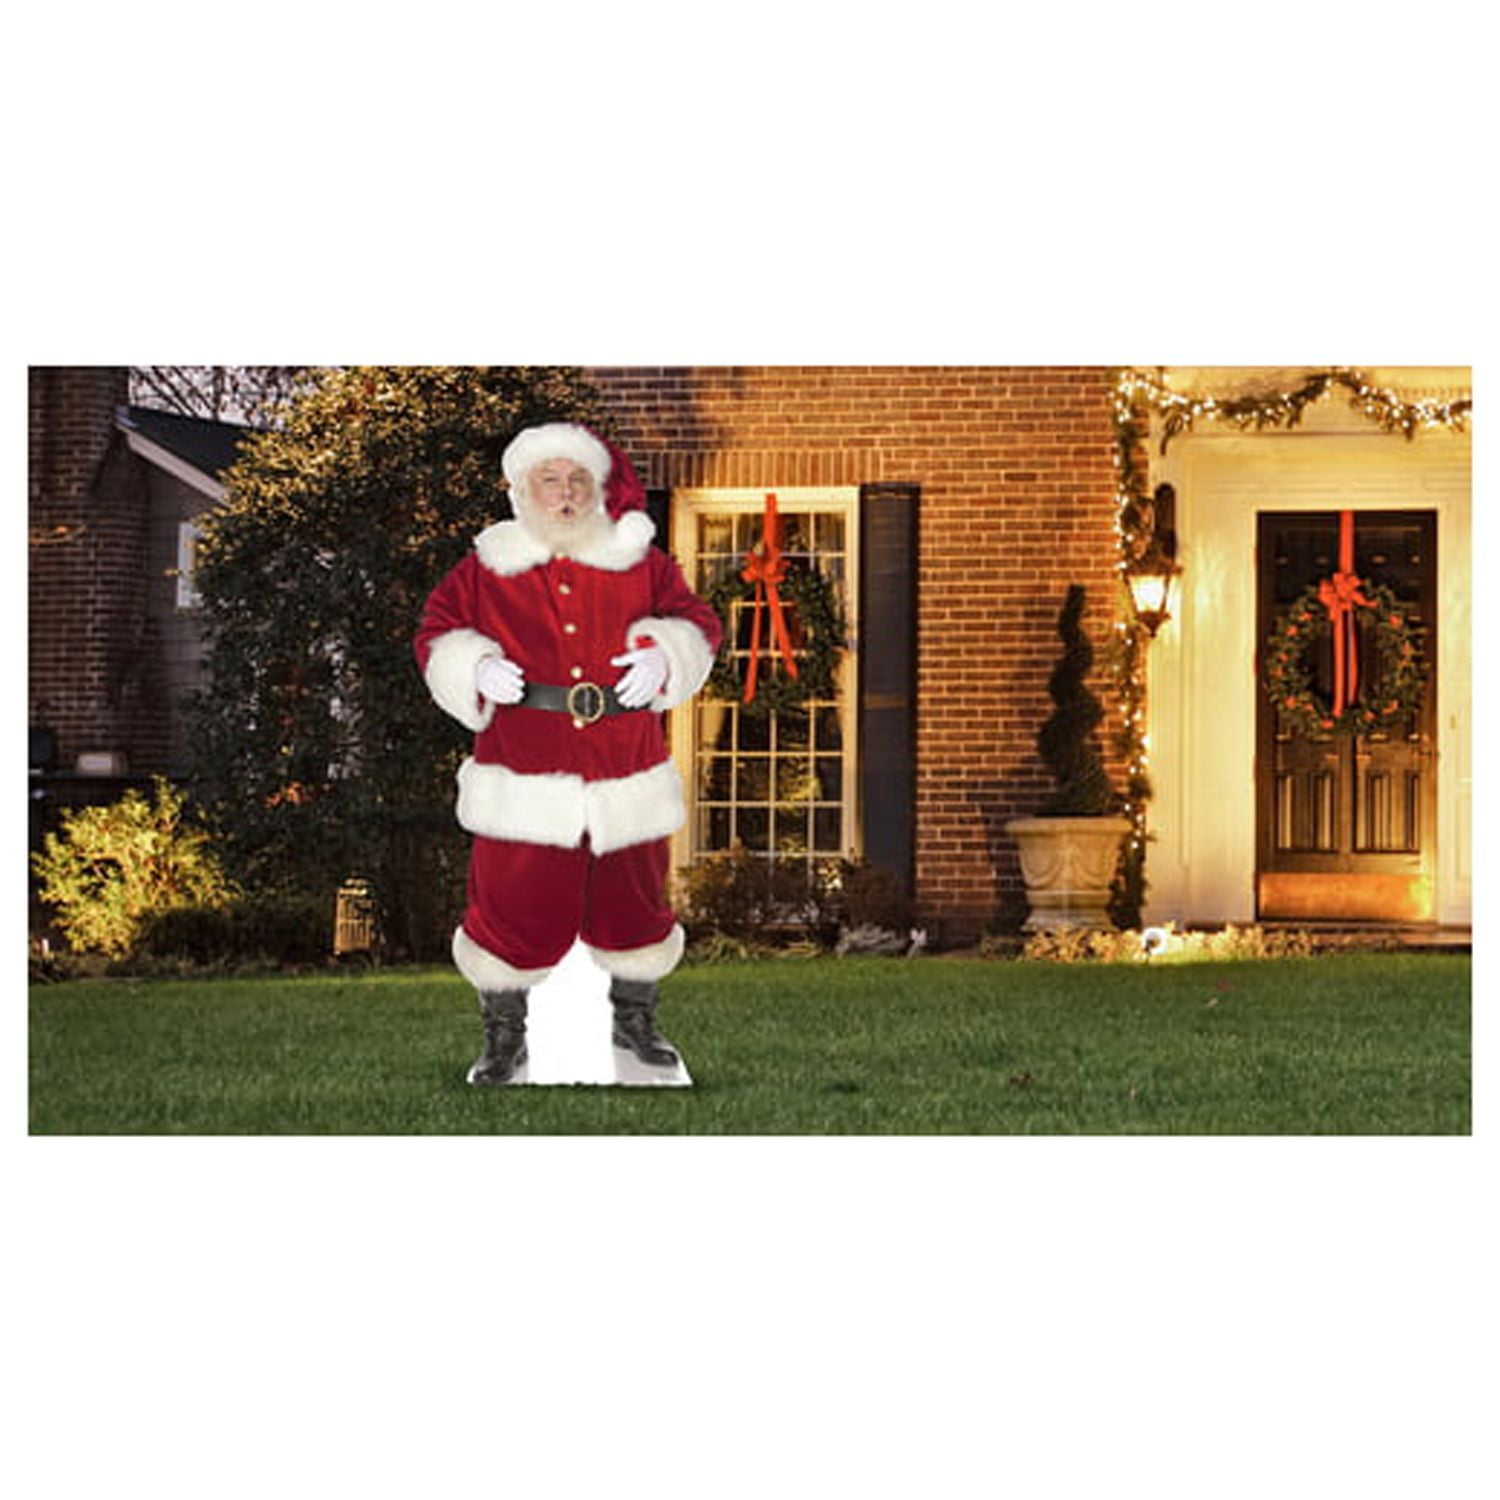 Picture of Advanced Graphics 2571 70 x 32 in. Ho & Ho Santa Outdoor Yard Standee